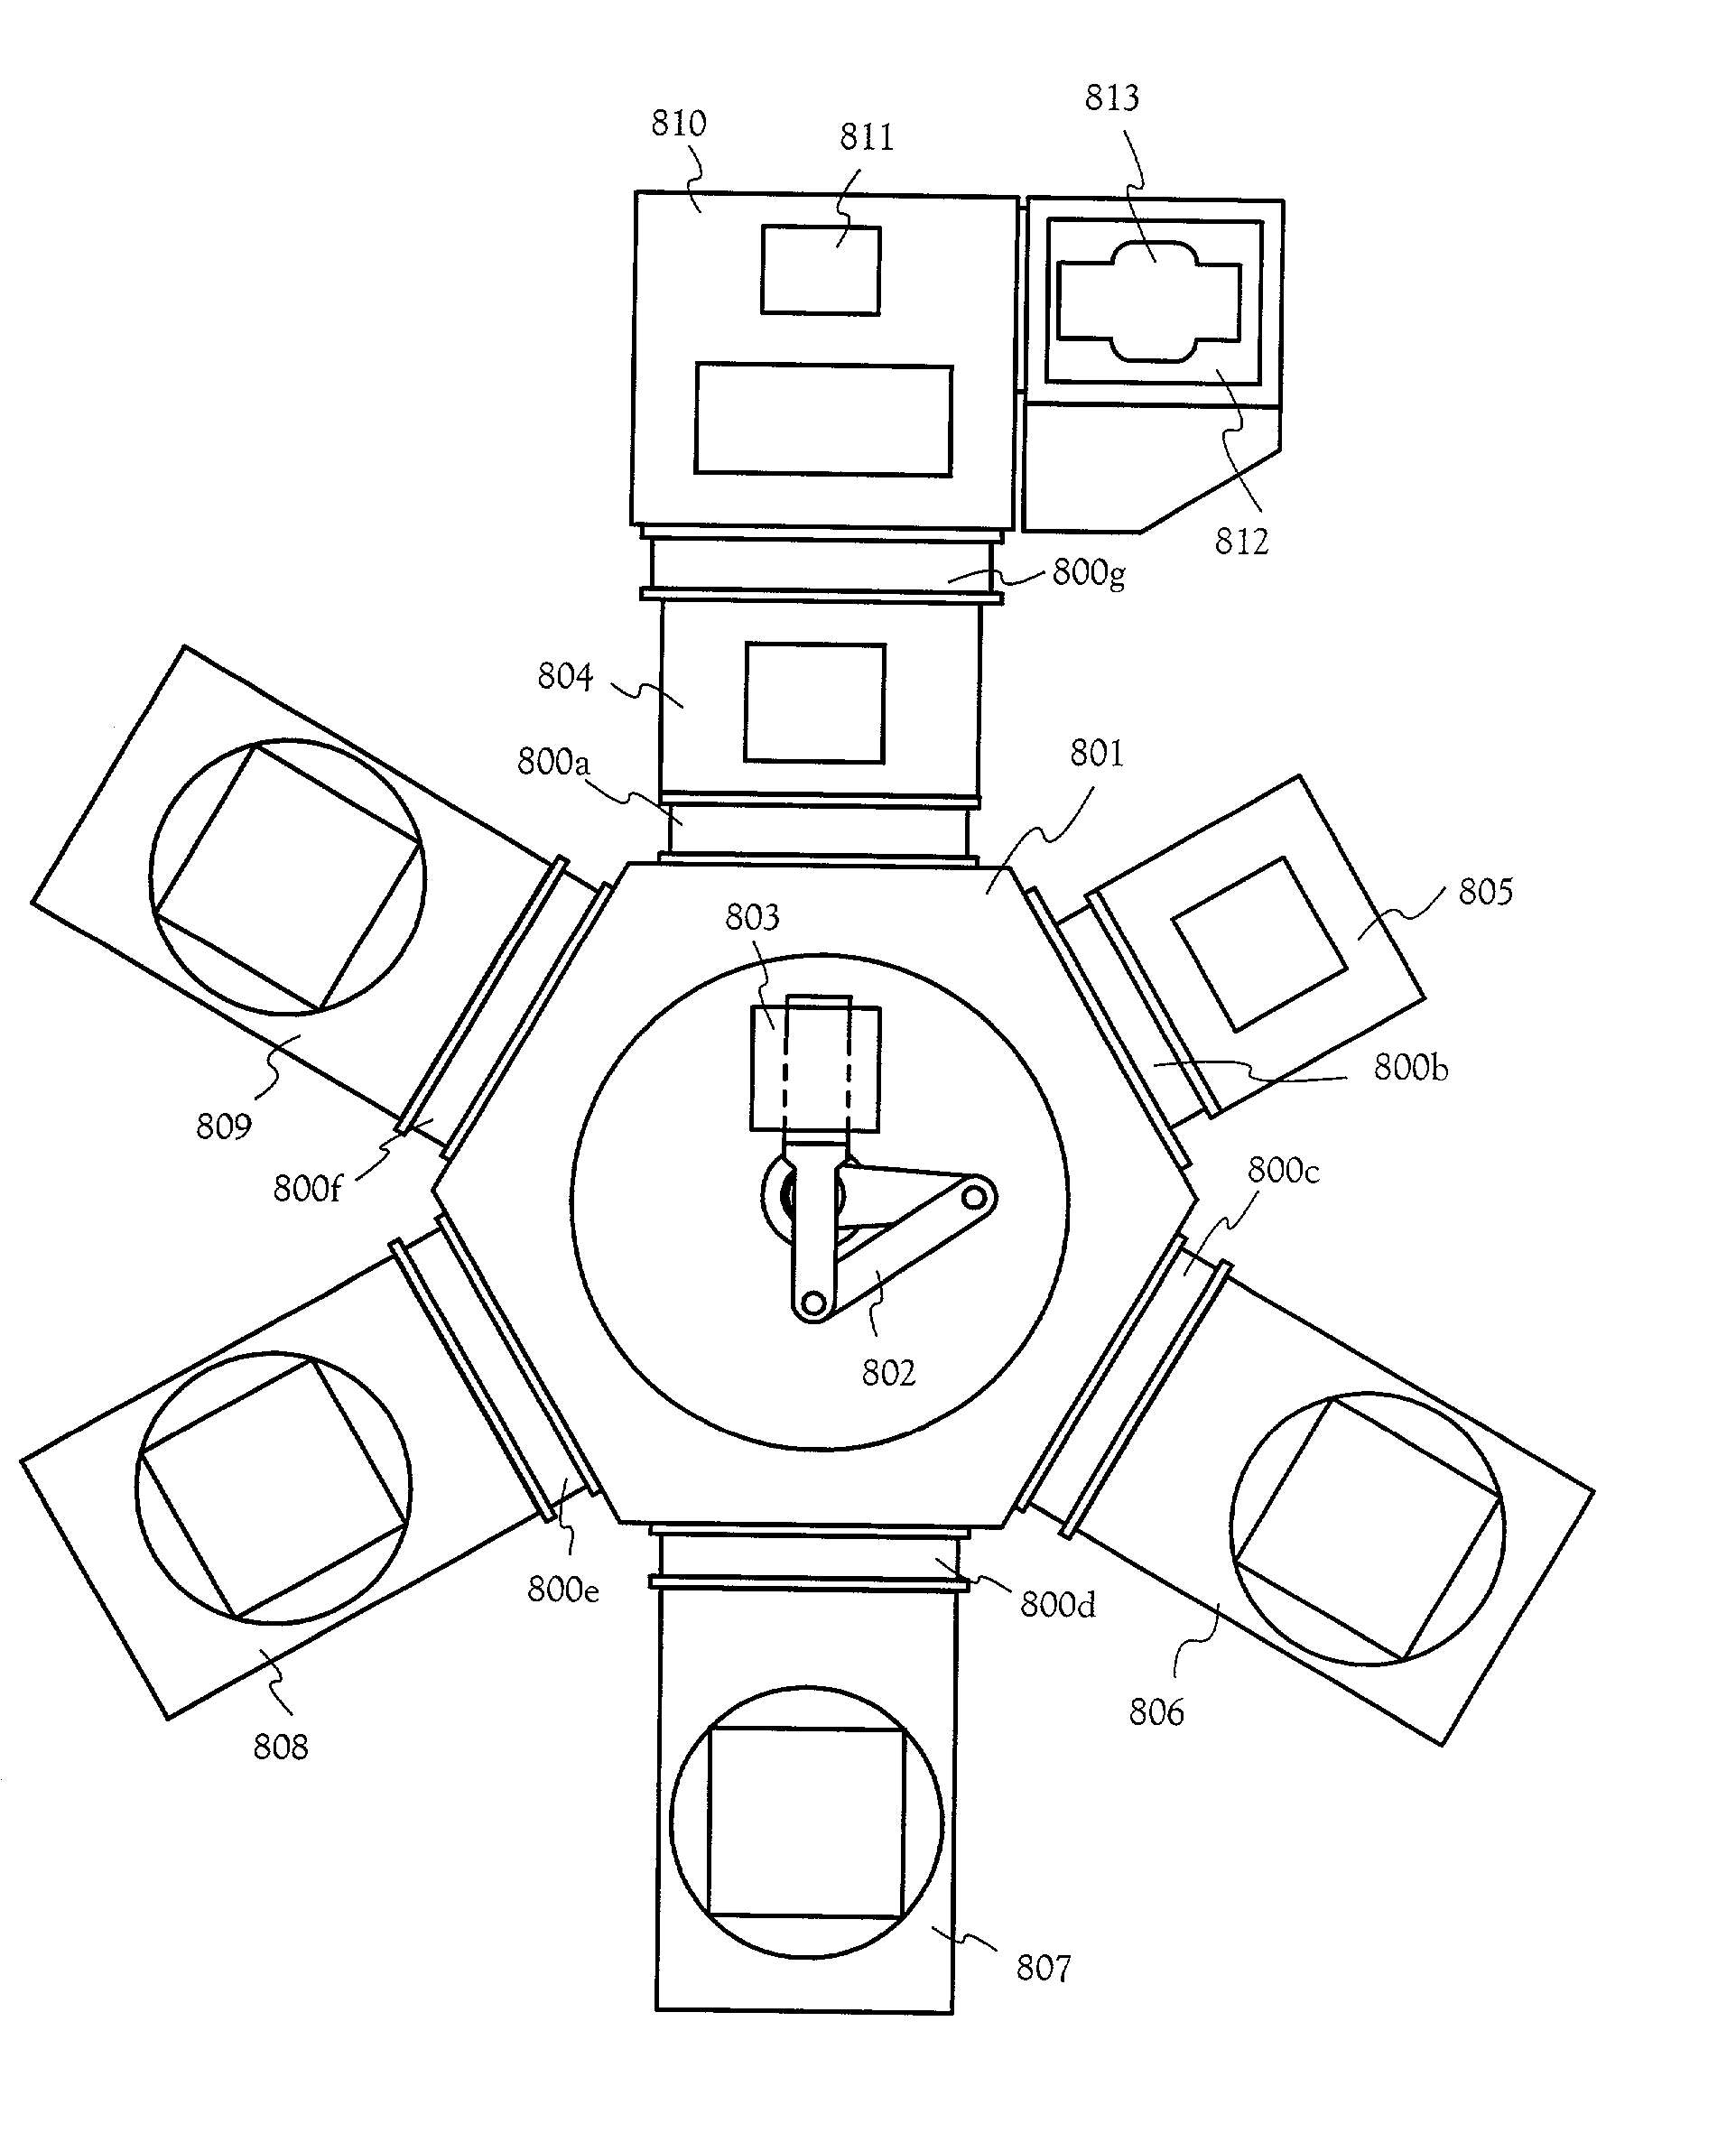 Film-forming apparatus, method of cleaning the same, and method of manufacturing a light-emitting device